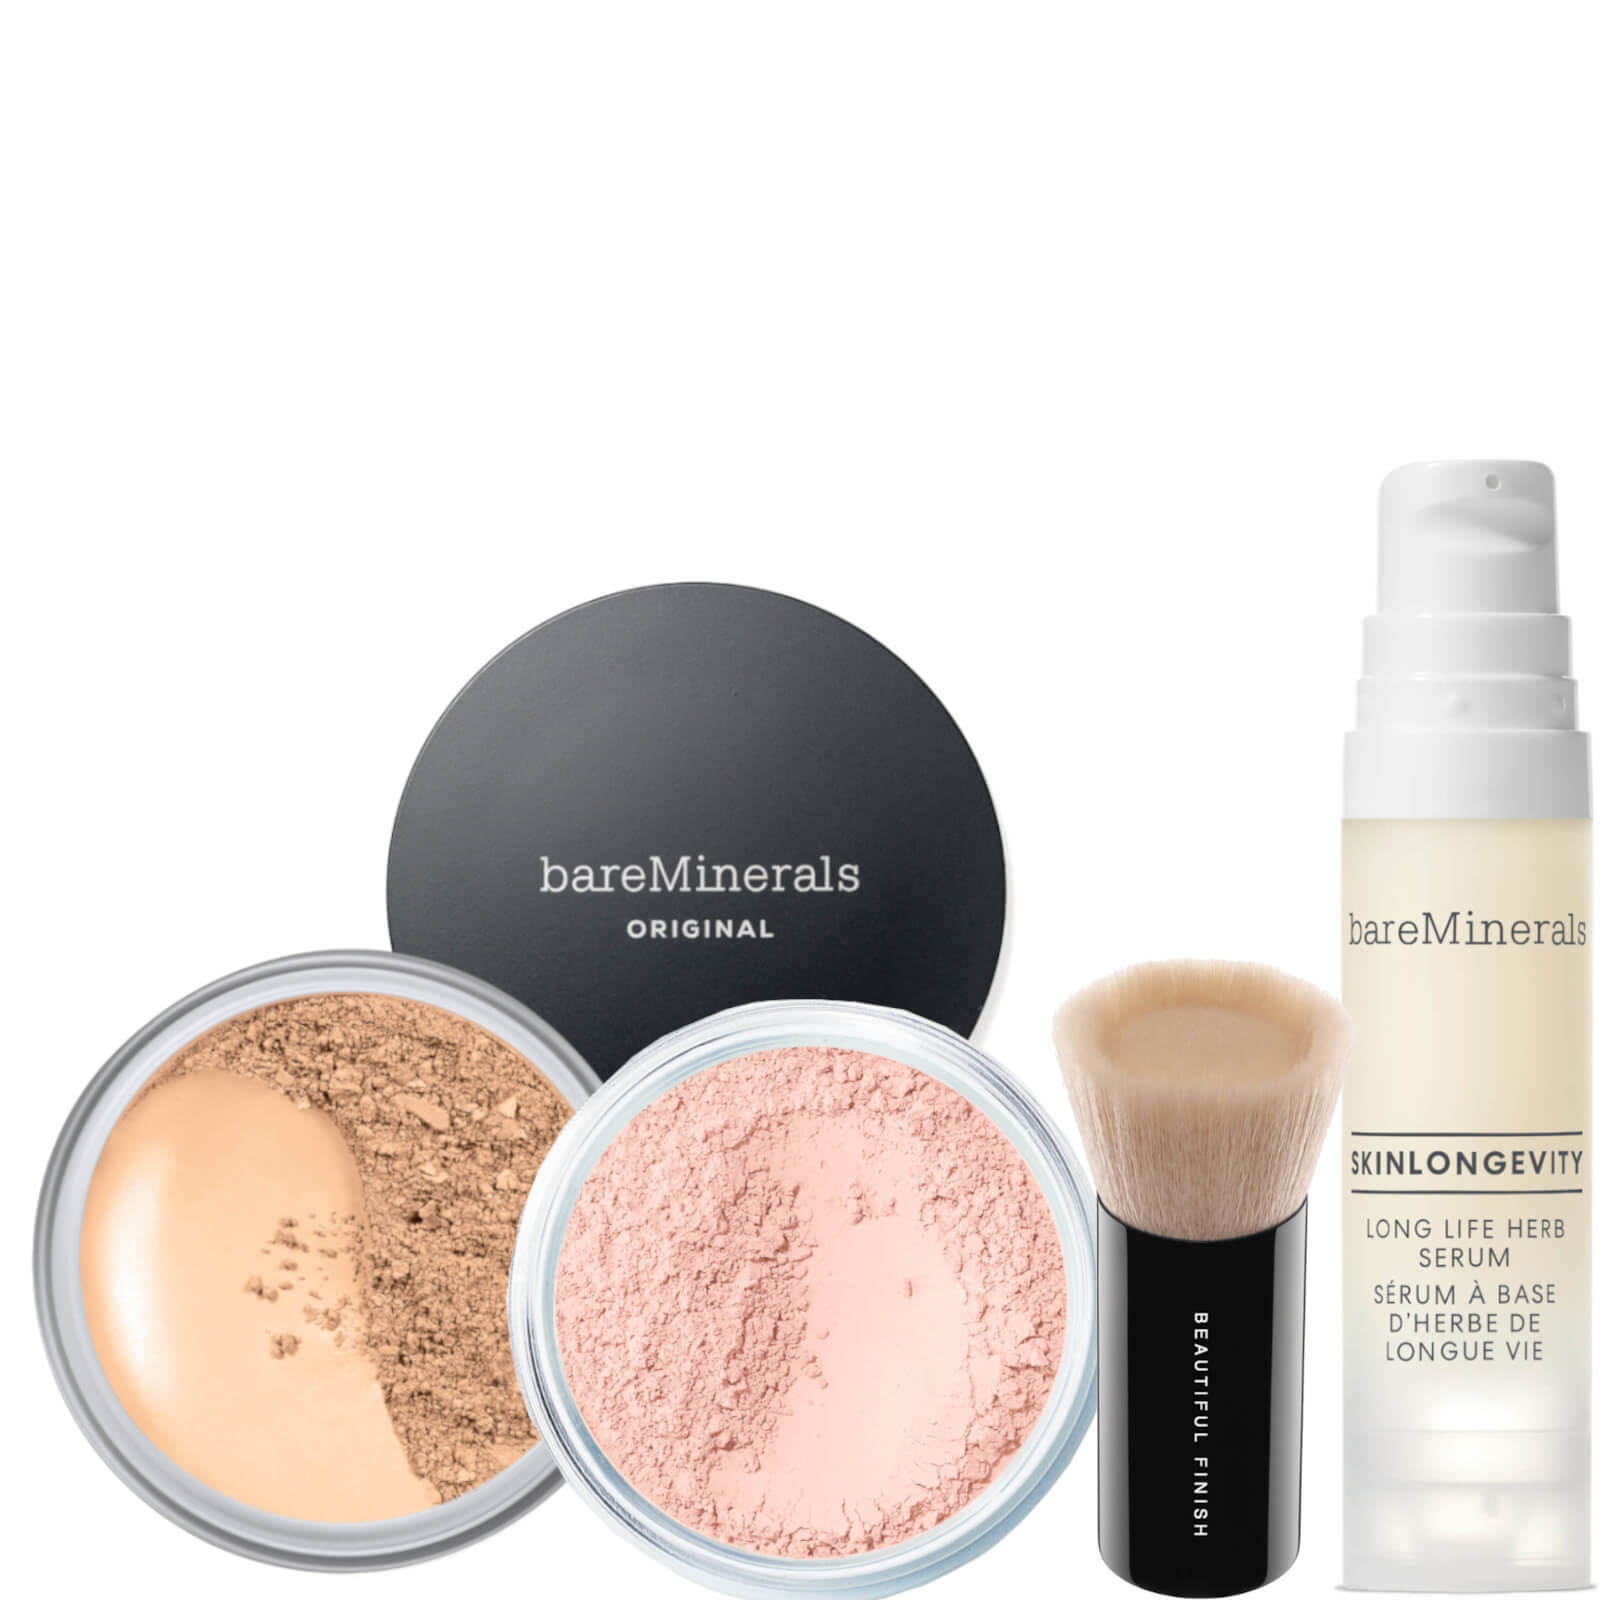 bareMinerals Get Started Bundle (Various Options) - Fairly Light